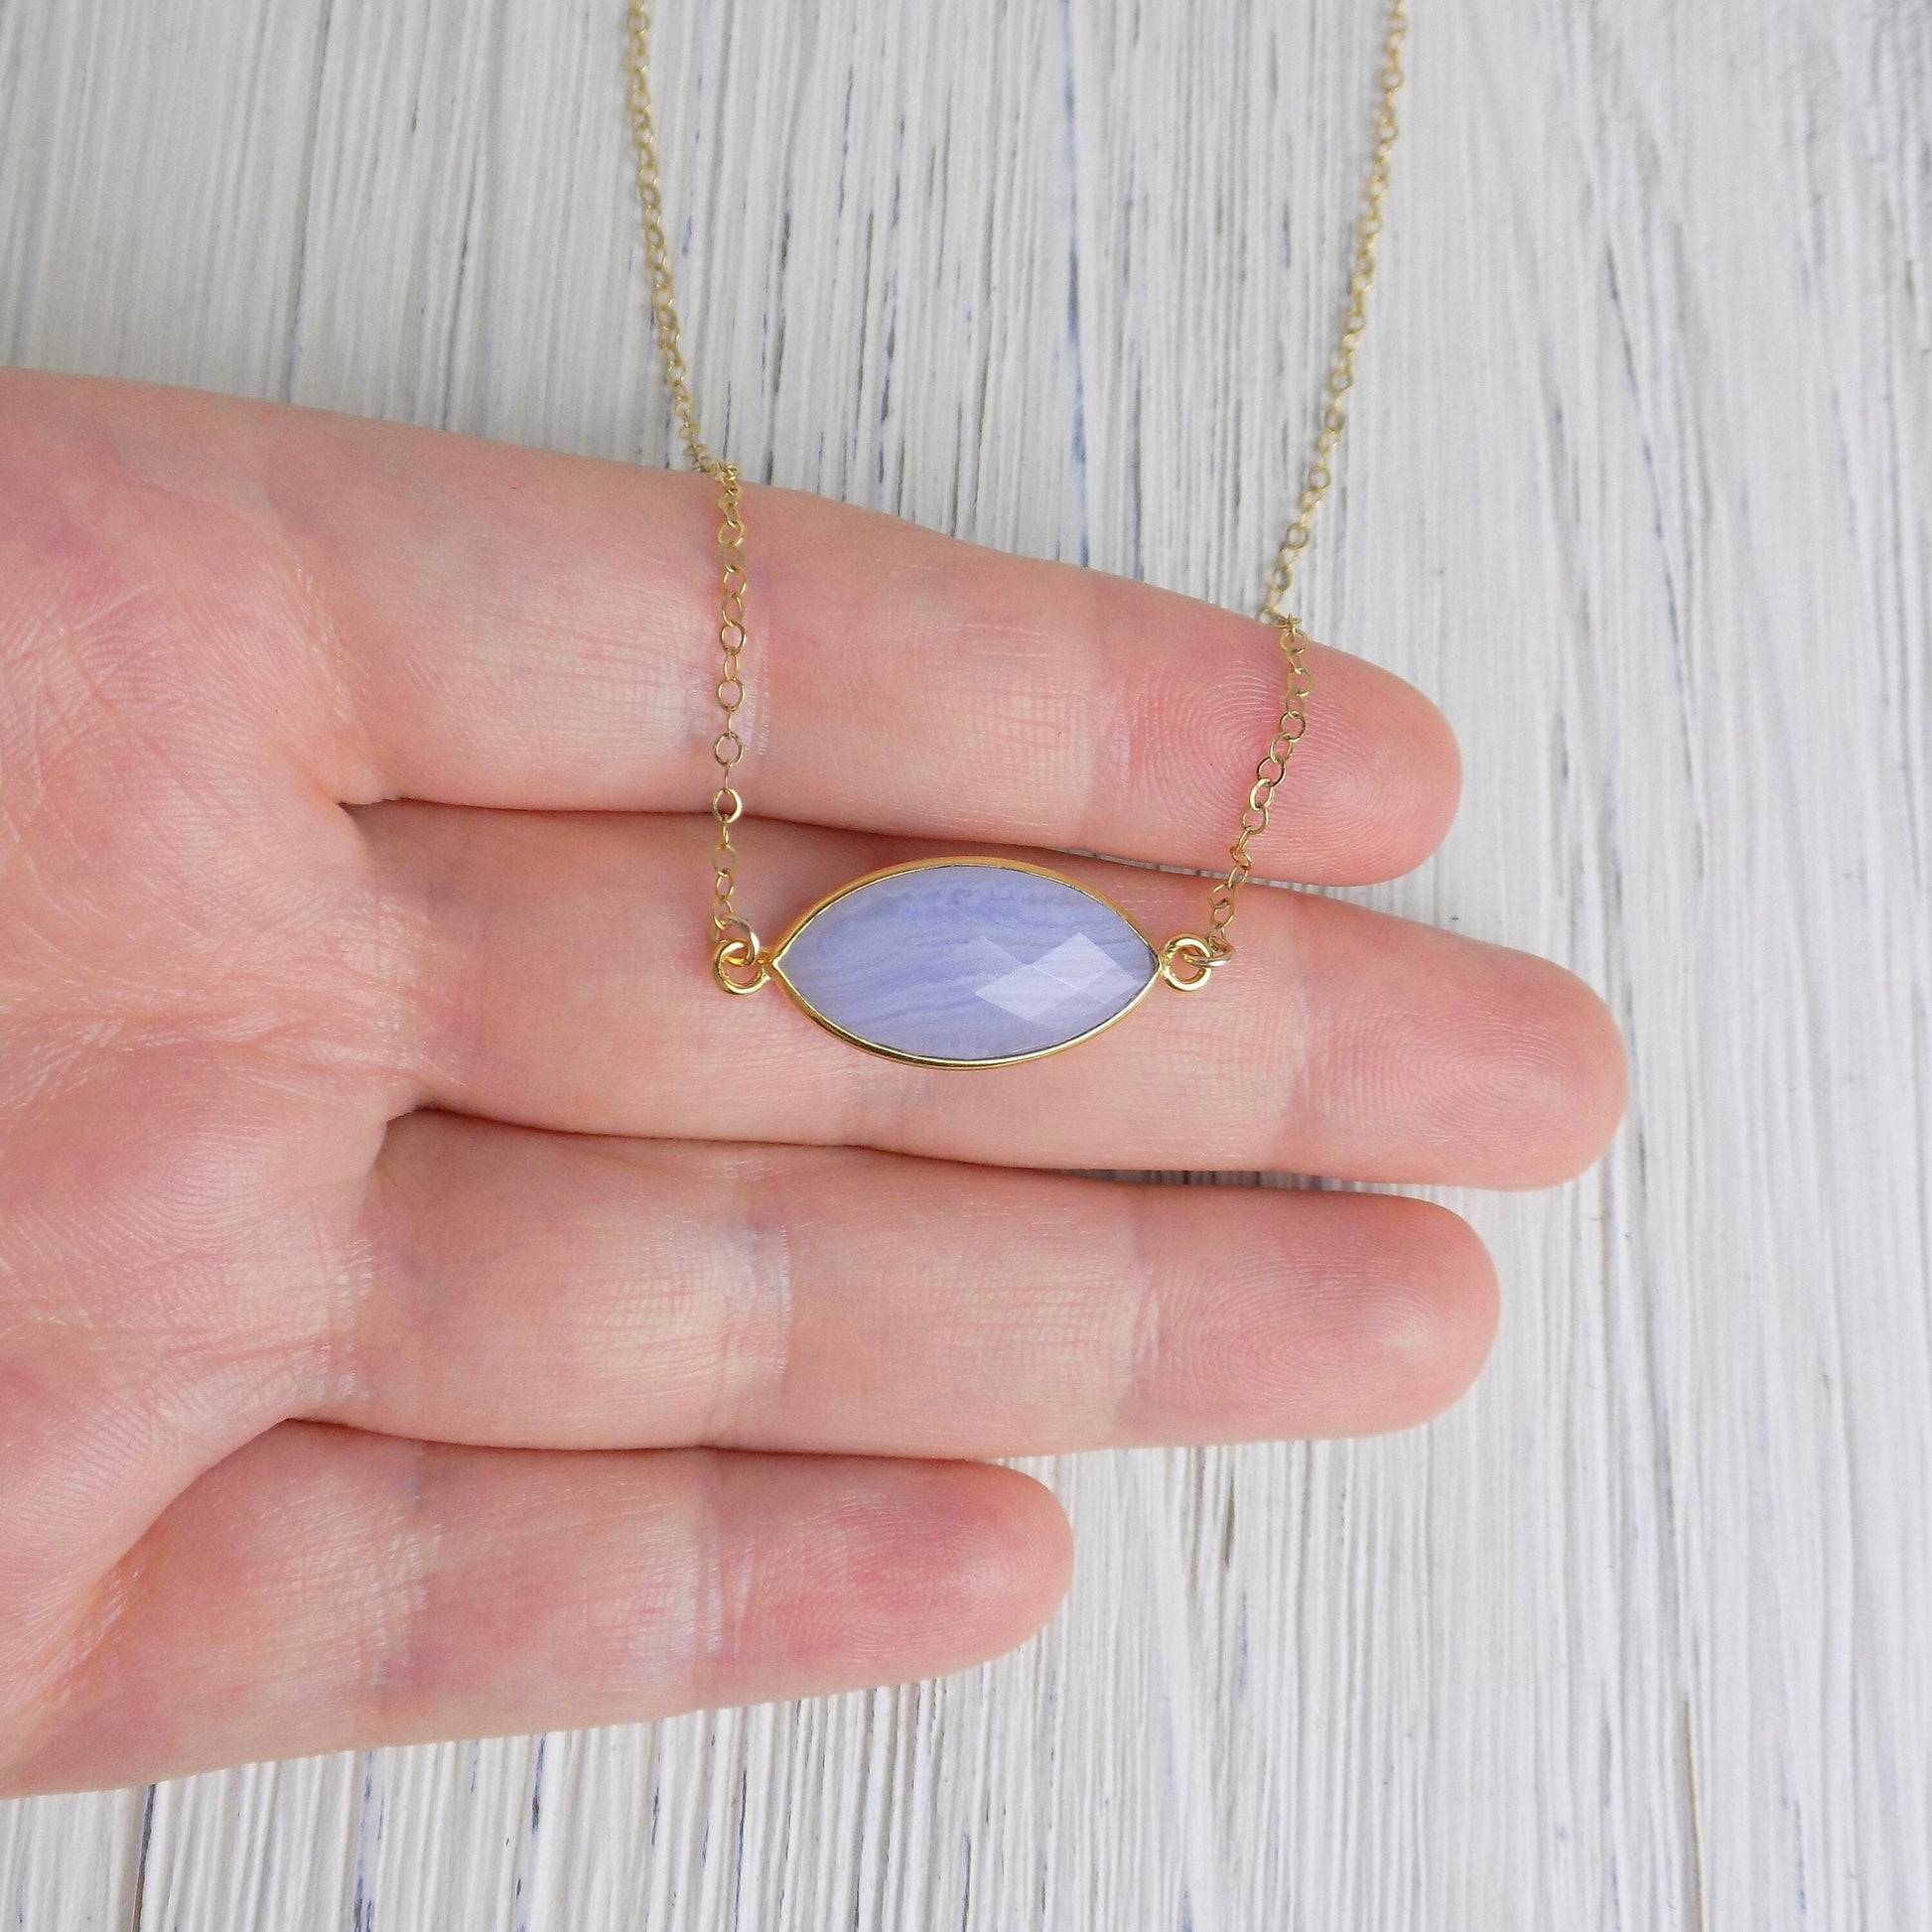 Calming Blue Lace Agate Natural Gemstone Necklace 14K Gold Filled Chain, Gift For Mom, M5-373